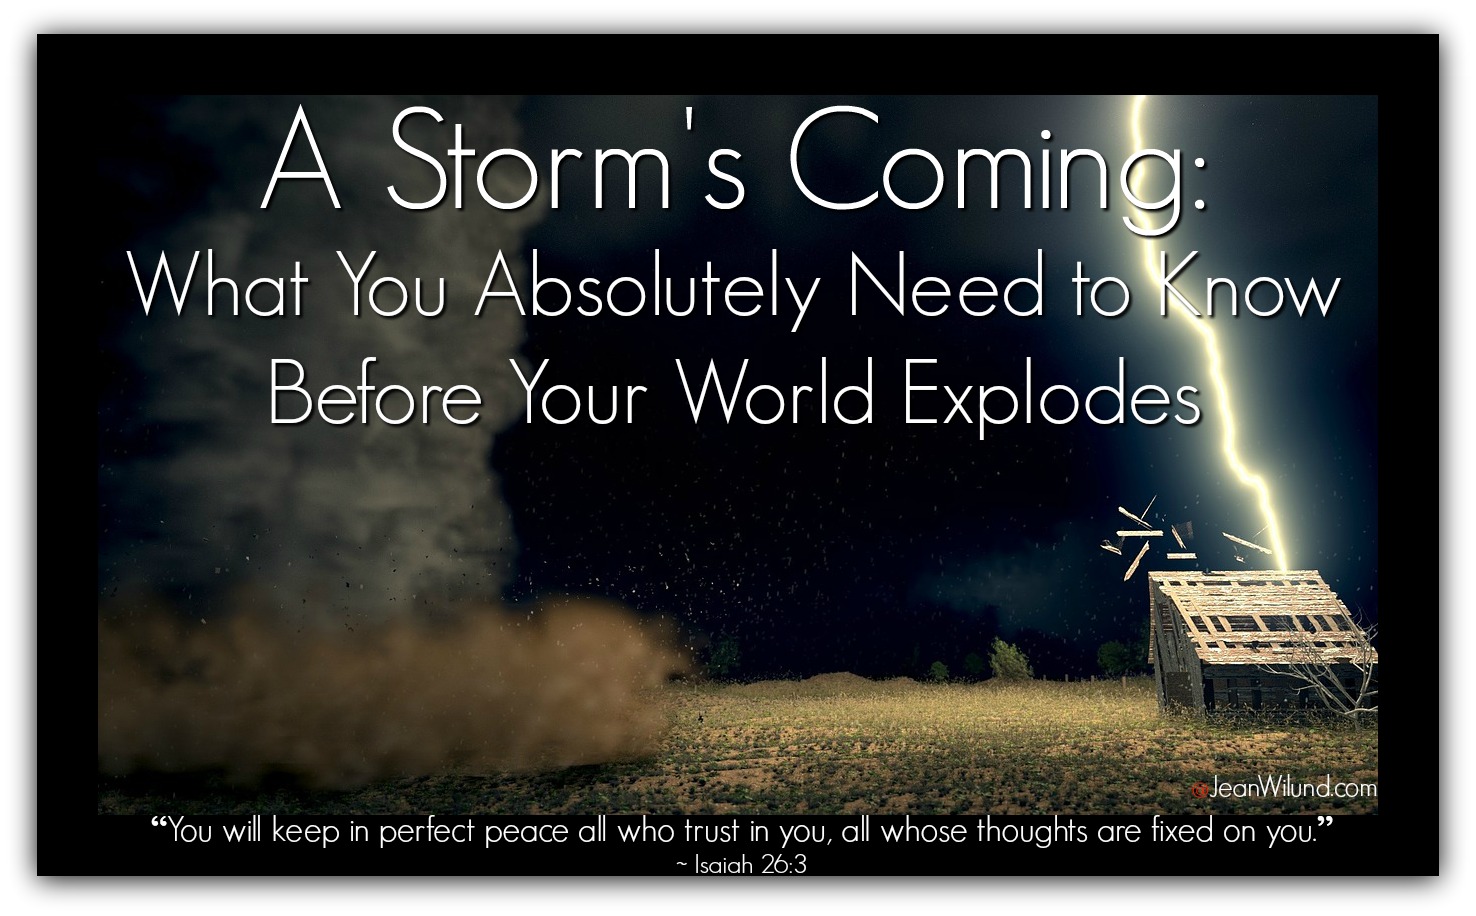 A Storm's Coming: What You Absolutely Need to Know Before Your World Explodes. People Don't Rise to the Occasion. They Fall Back on Their Training. via www.JeanWilund.com